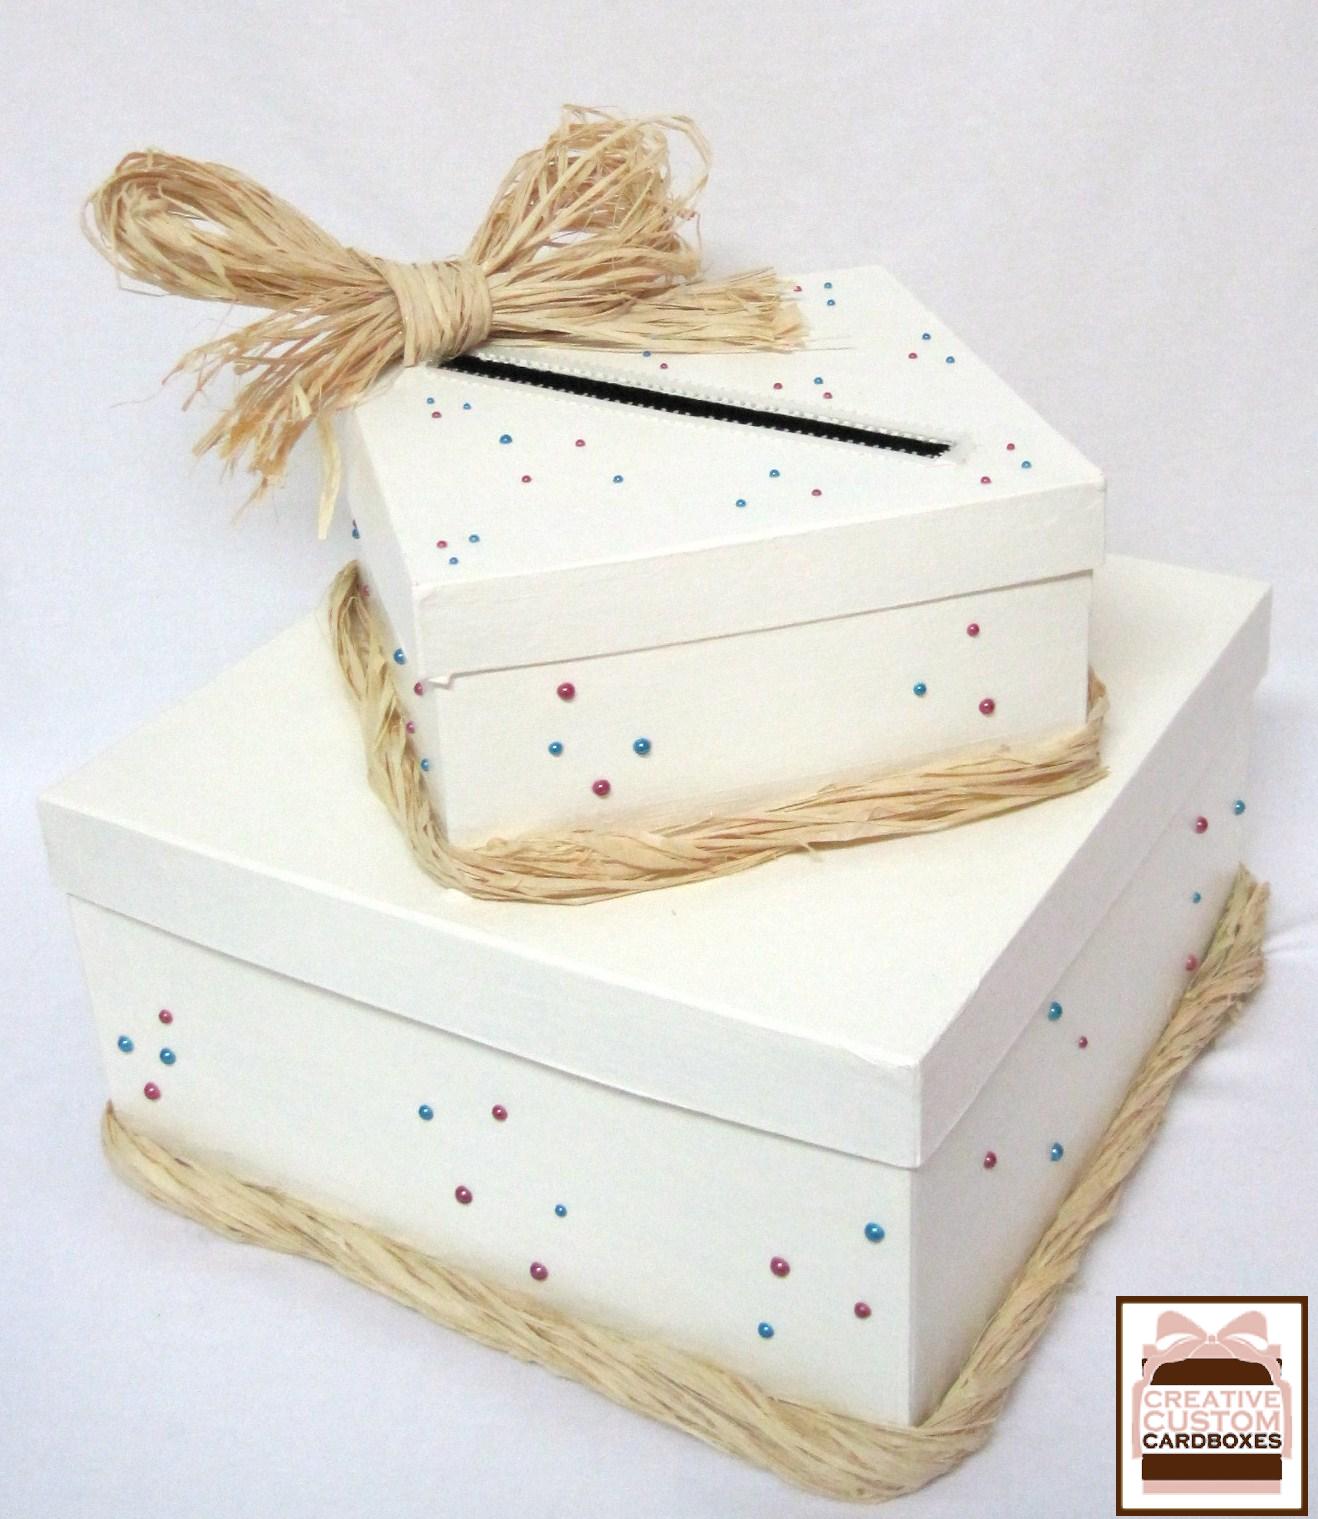 purple wedding cake designs We think this eco-CHIC card box came out wonderfully! What do you 